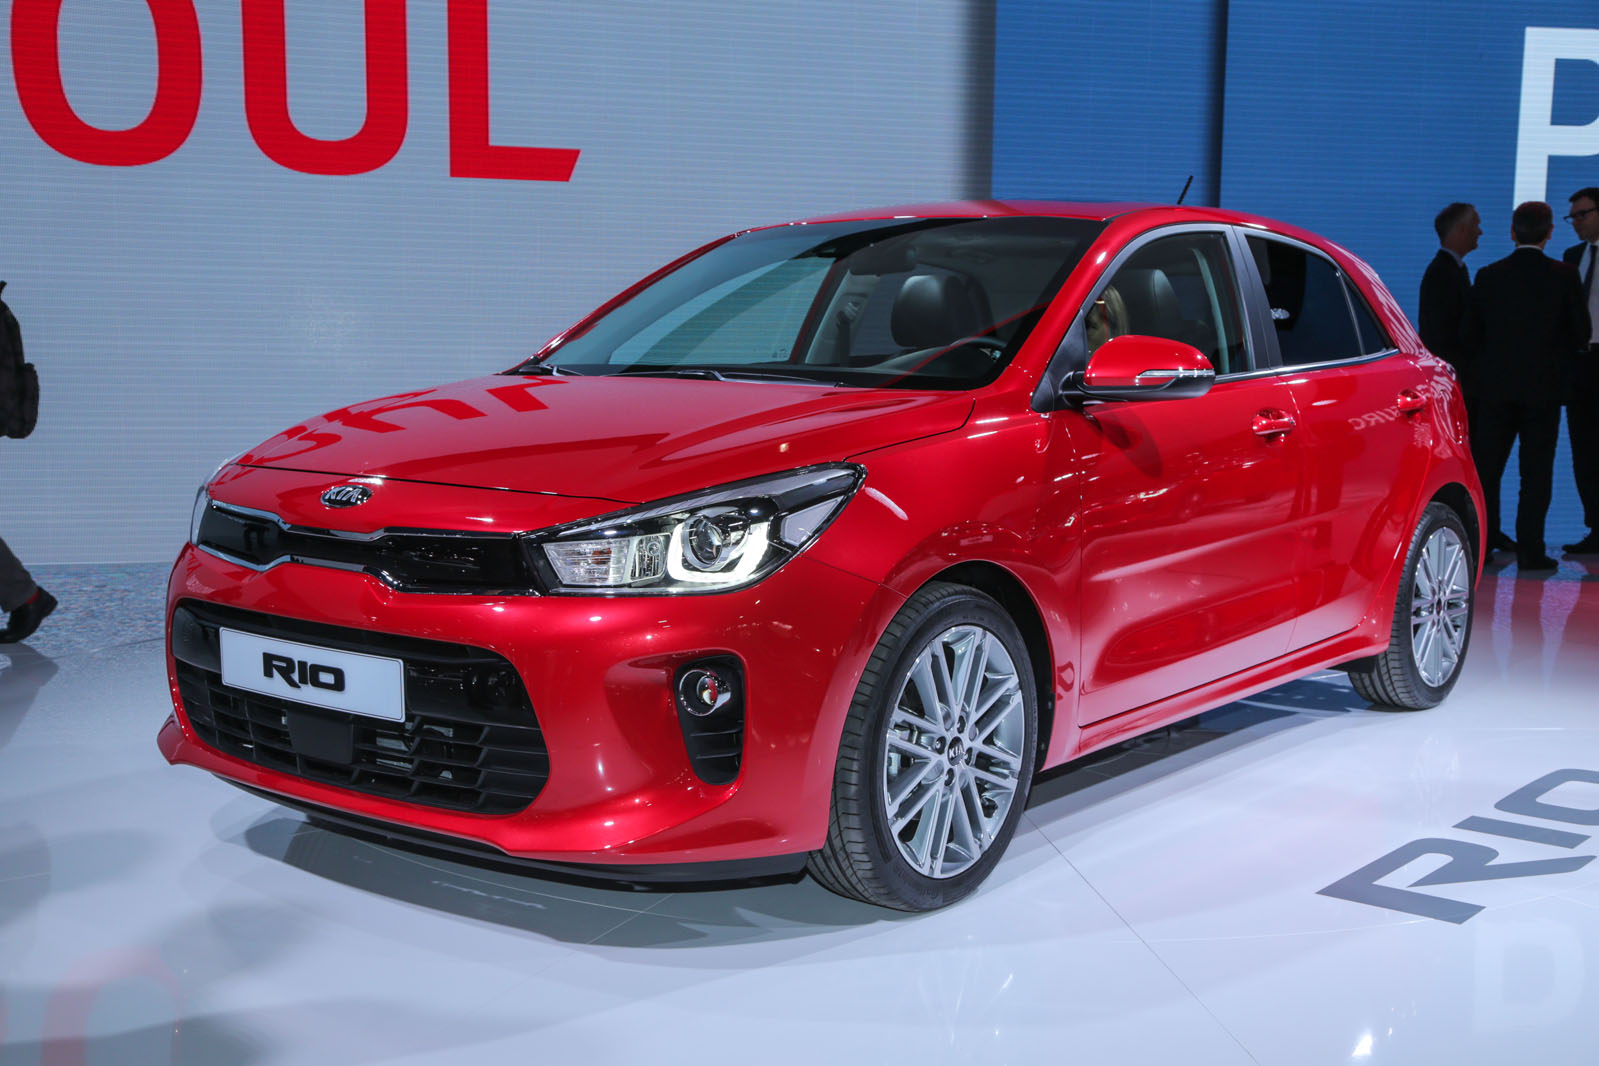 2017 Kia Rio on sale today priced from £11,995 Autocar